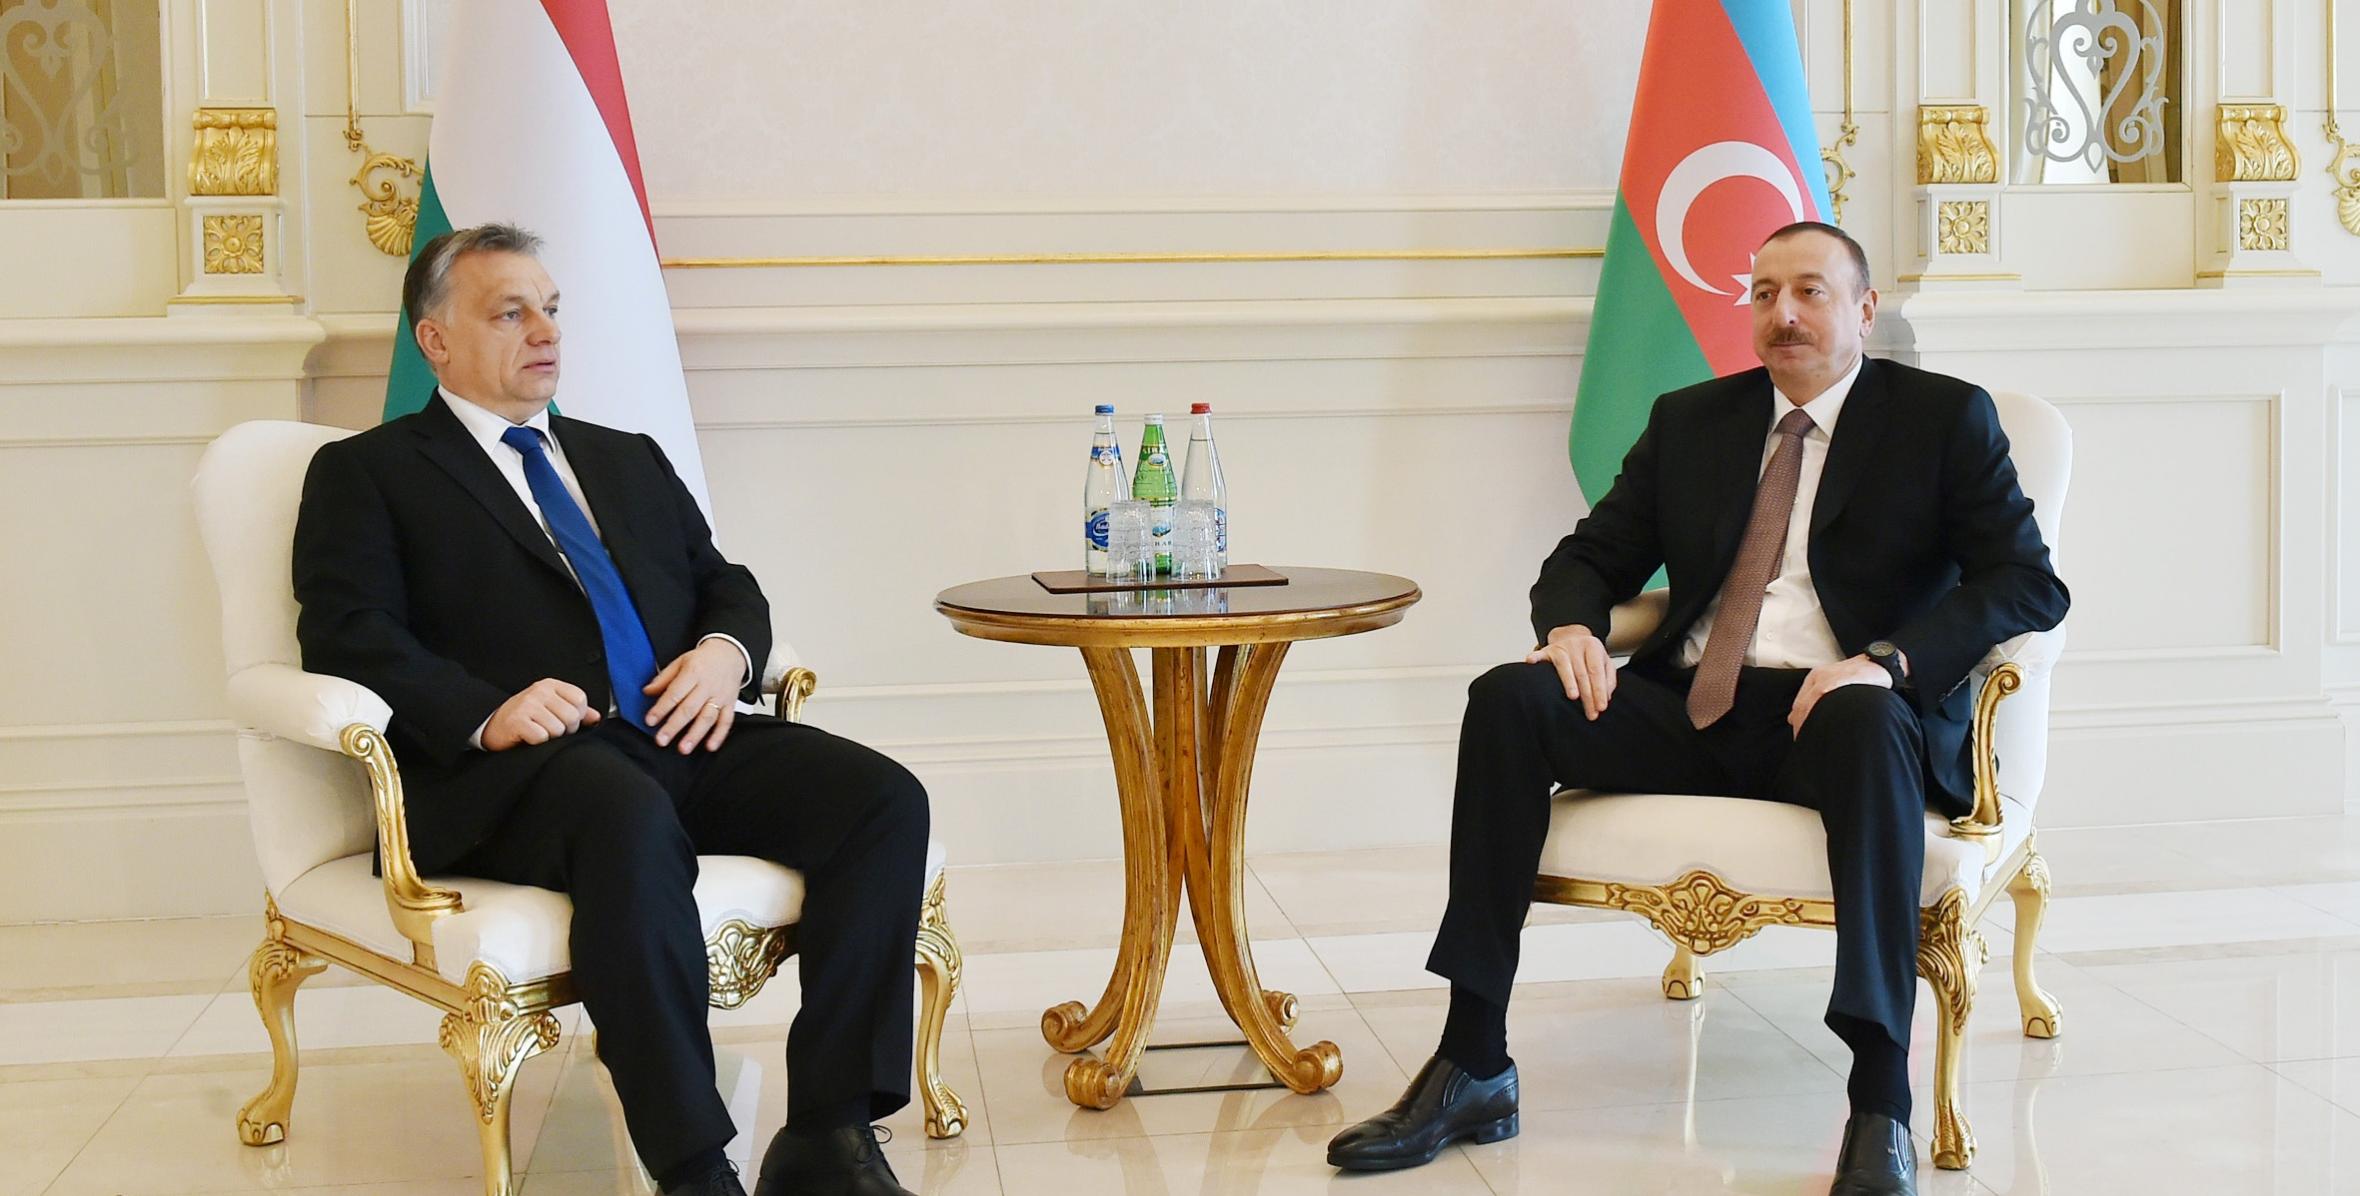 Ilham Aliyev and Hungarian Prime Minister Viktor Orban held a one-on-one meeting